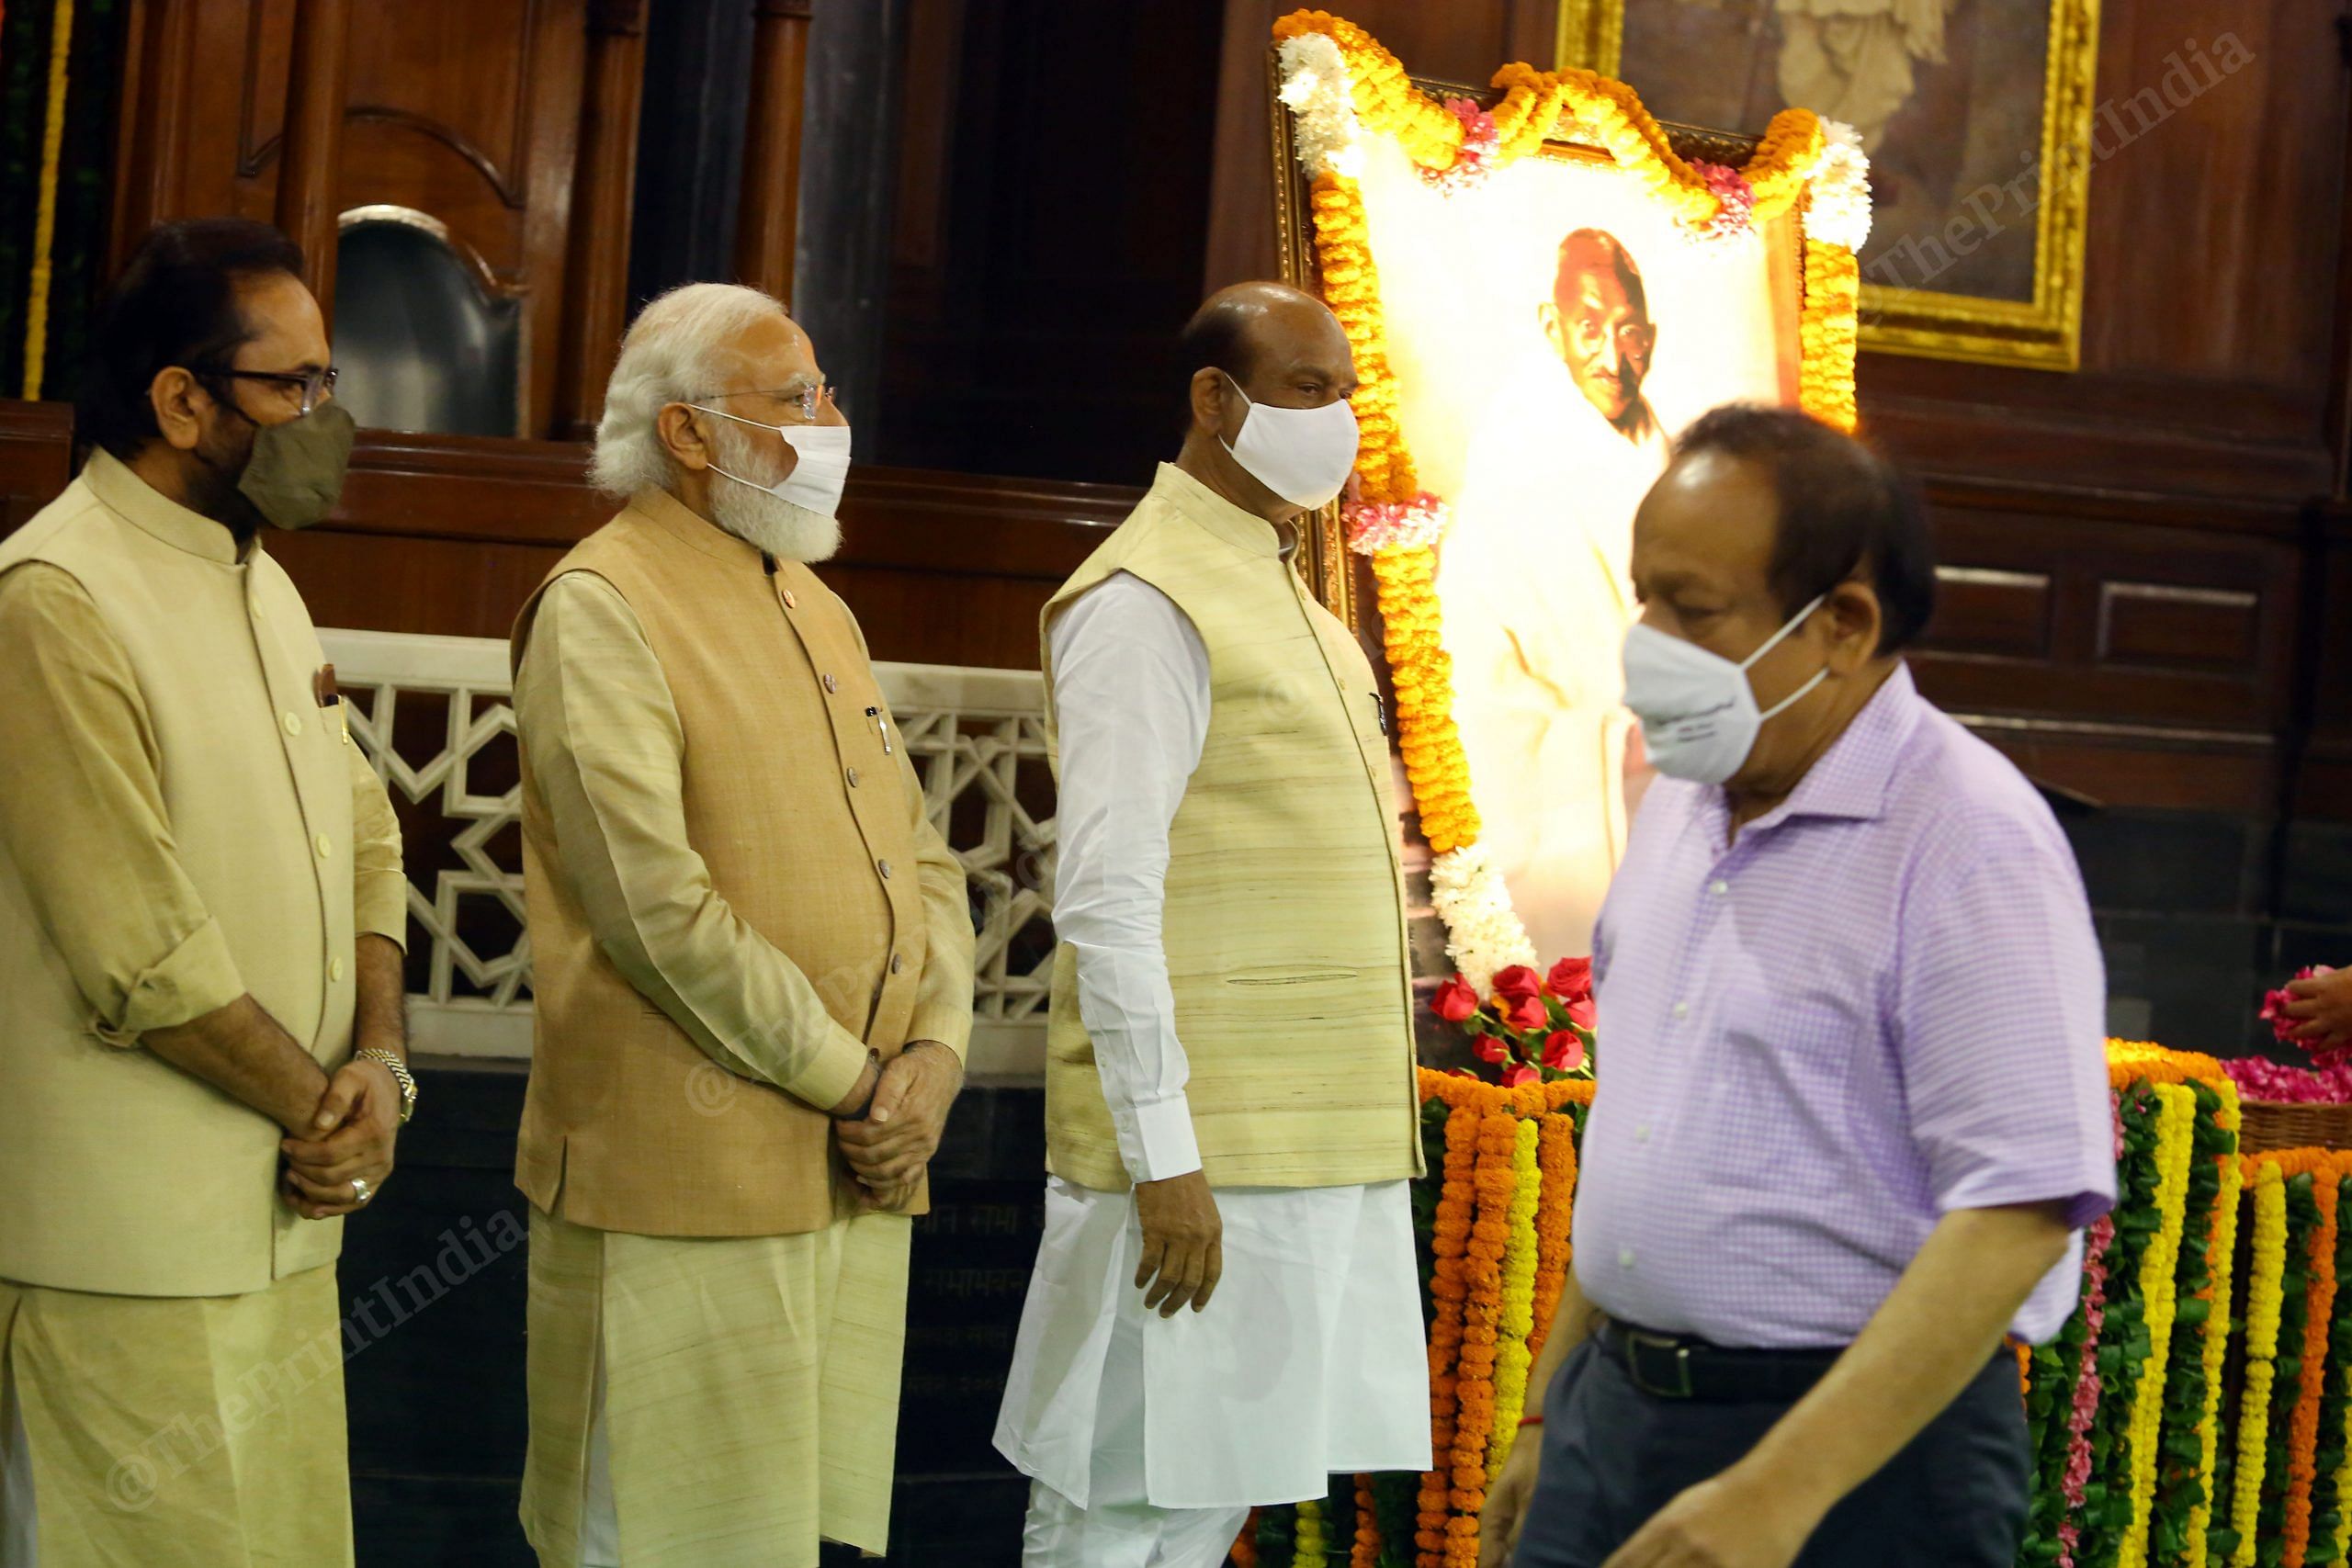 (From left to right) Union Minister Mukhtar Abbas Naqvi, Prime Minister Narendra Modi and Lok sabha speaker Om Birla stand near Gandhi's portrait, as  former Cabinet Minister Harsh Vardhan leaves, after paying tribute to Mahatma Gandhi at Central Hall, Parliament House | Photo: Praveen Jain | ThePrint